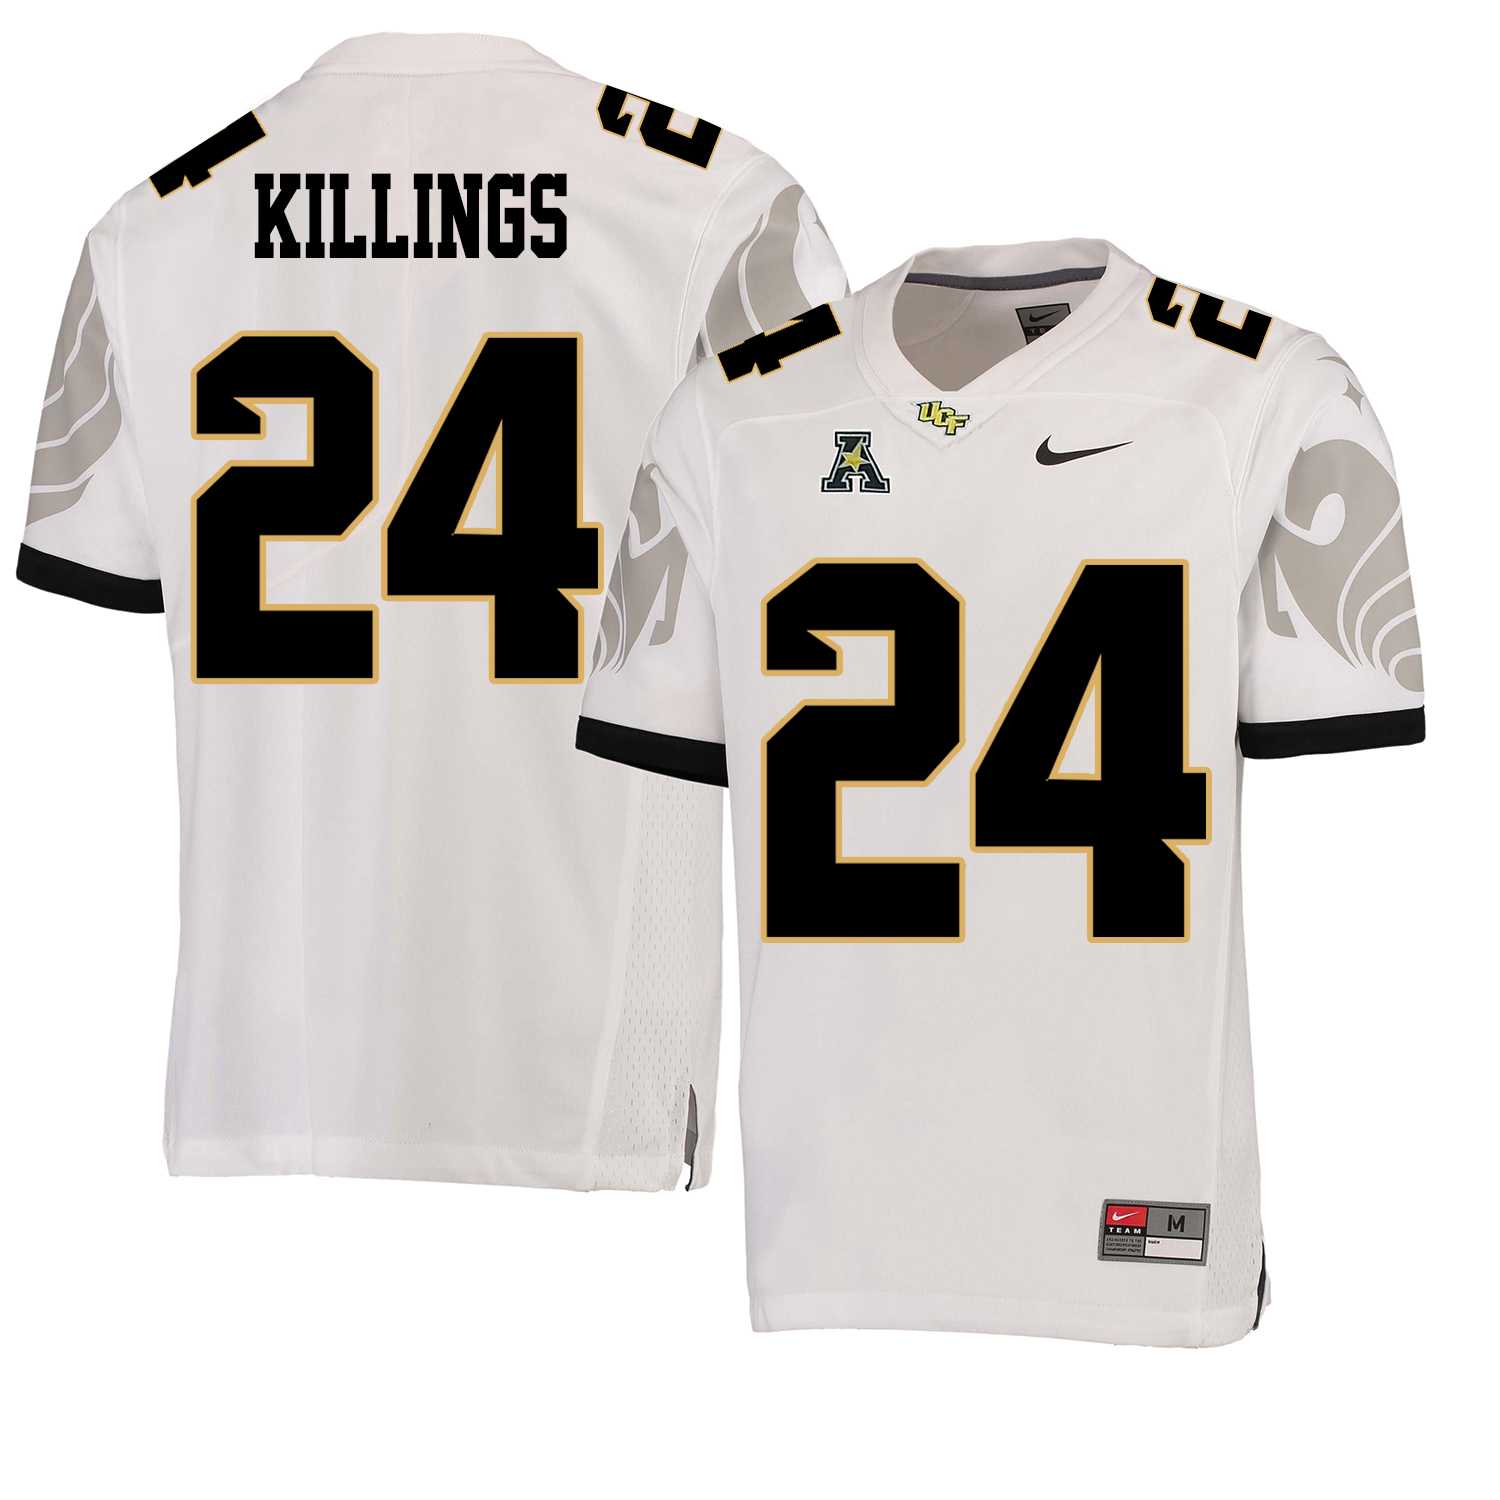 UCF Knights 24 D.J. Killings White College Football Jersey DingZhi